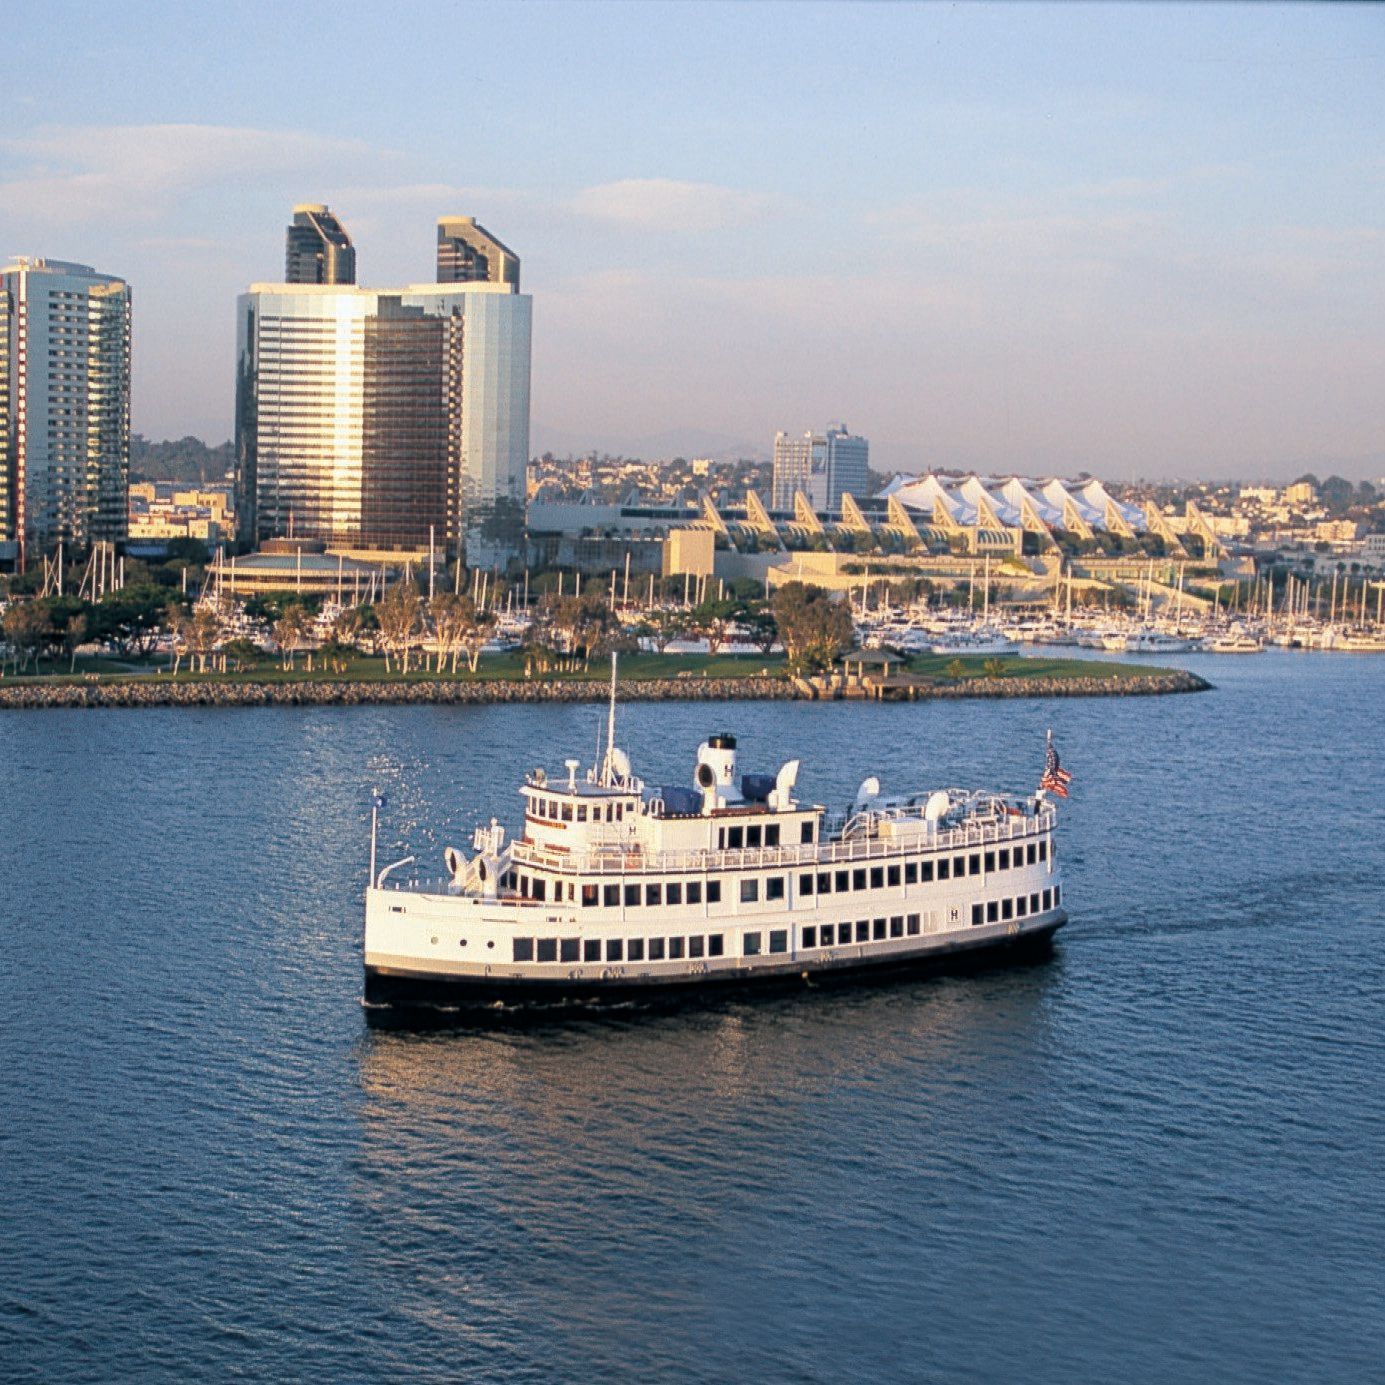 HORNBLOWER CRUISES AND EVENTS TO RESTART SAN DIEGO OPERATIONS ON MAY 30